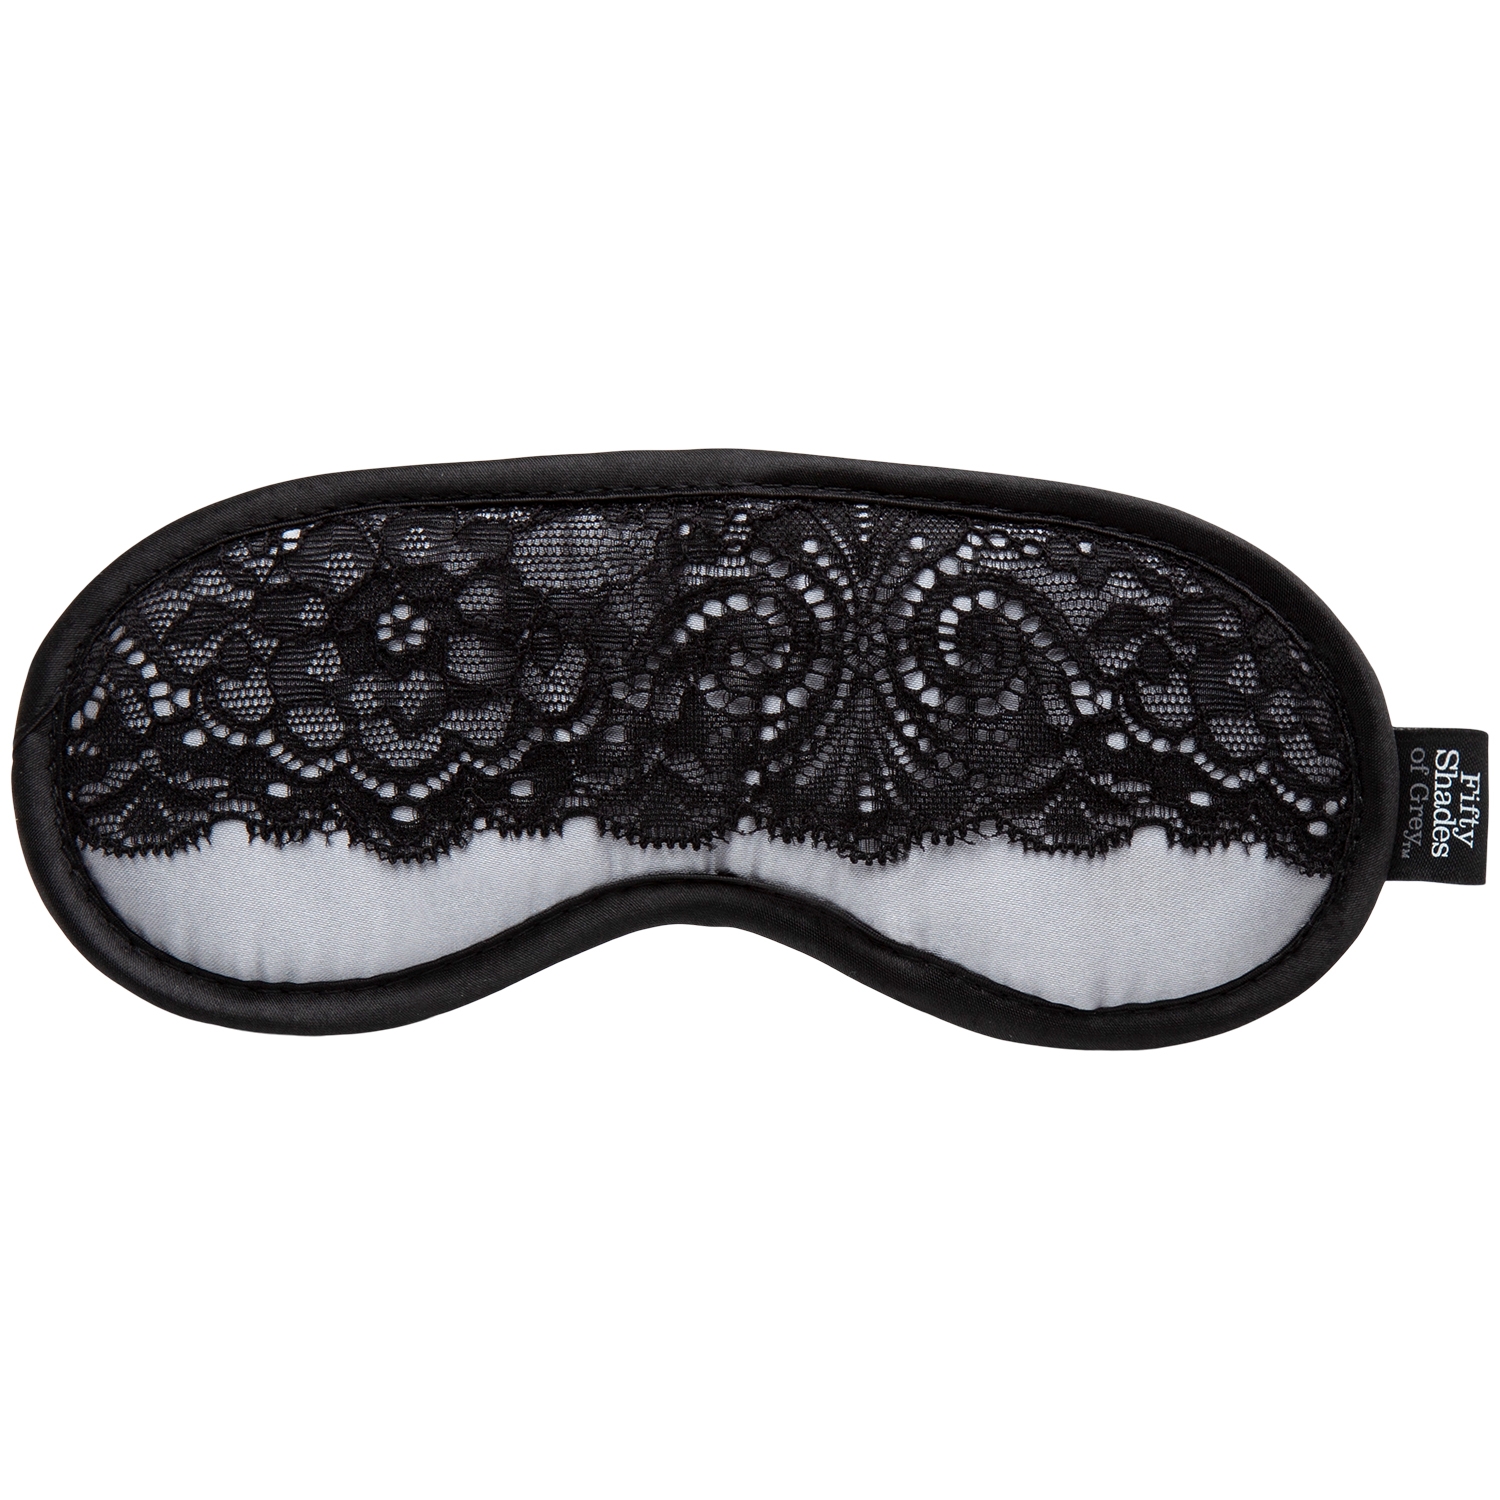 4: Fifty Shades of Grey Play Nice Satin Blindfold      - Black - One Size